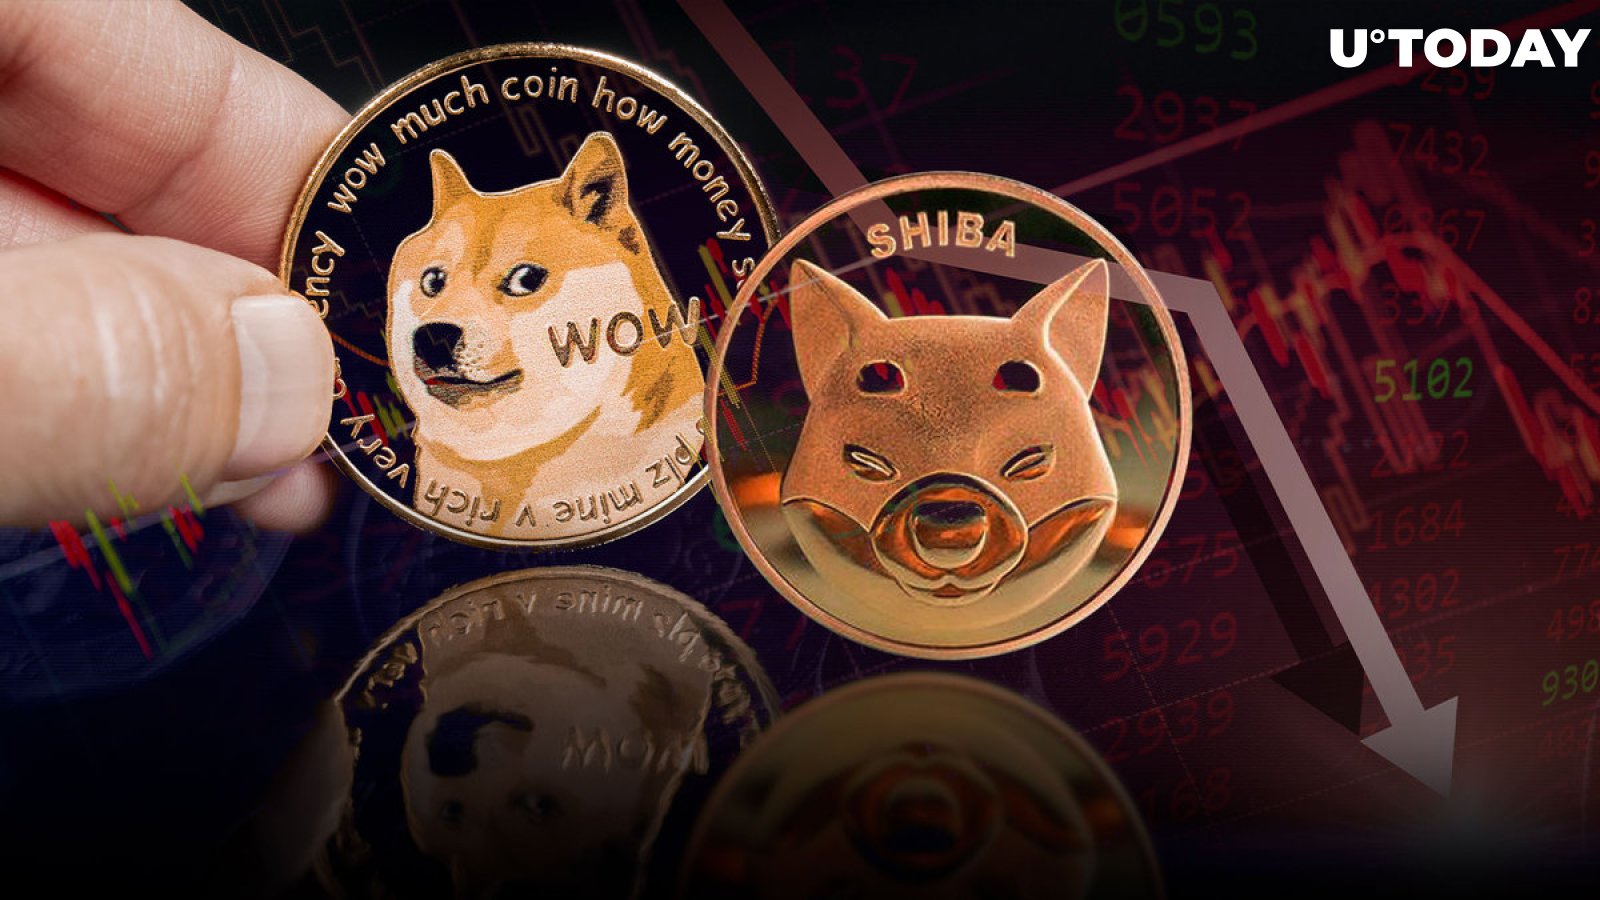 This Group of Shiba Inu and Doge Investors Caused 23% Plunge